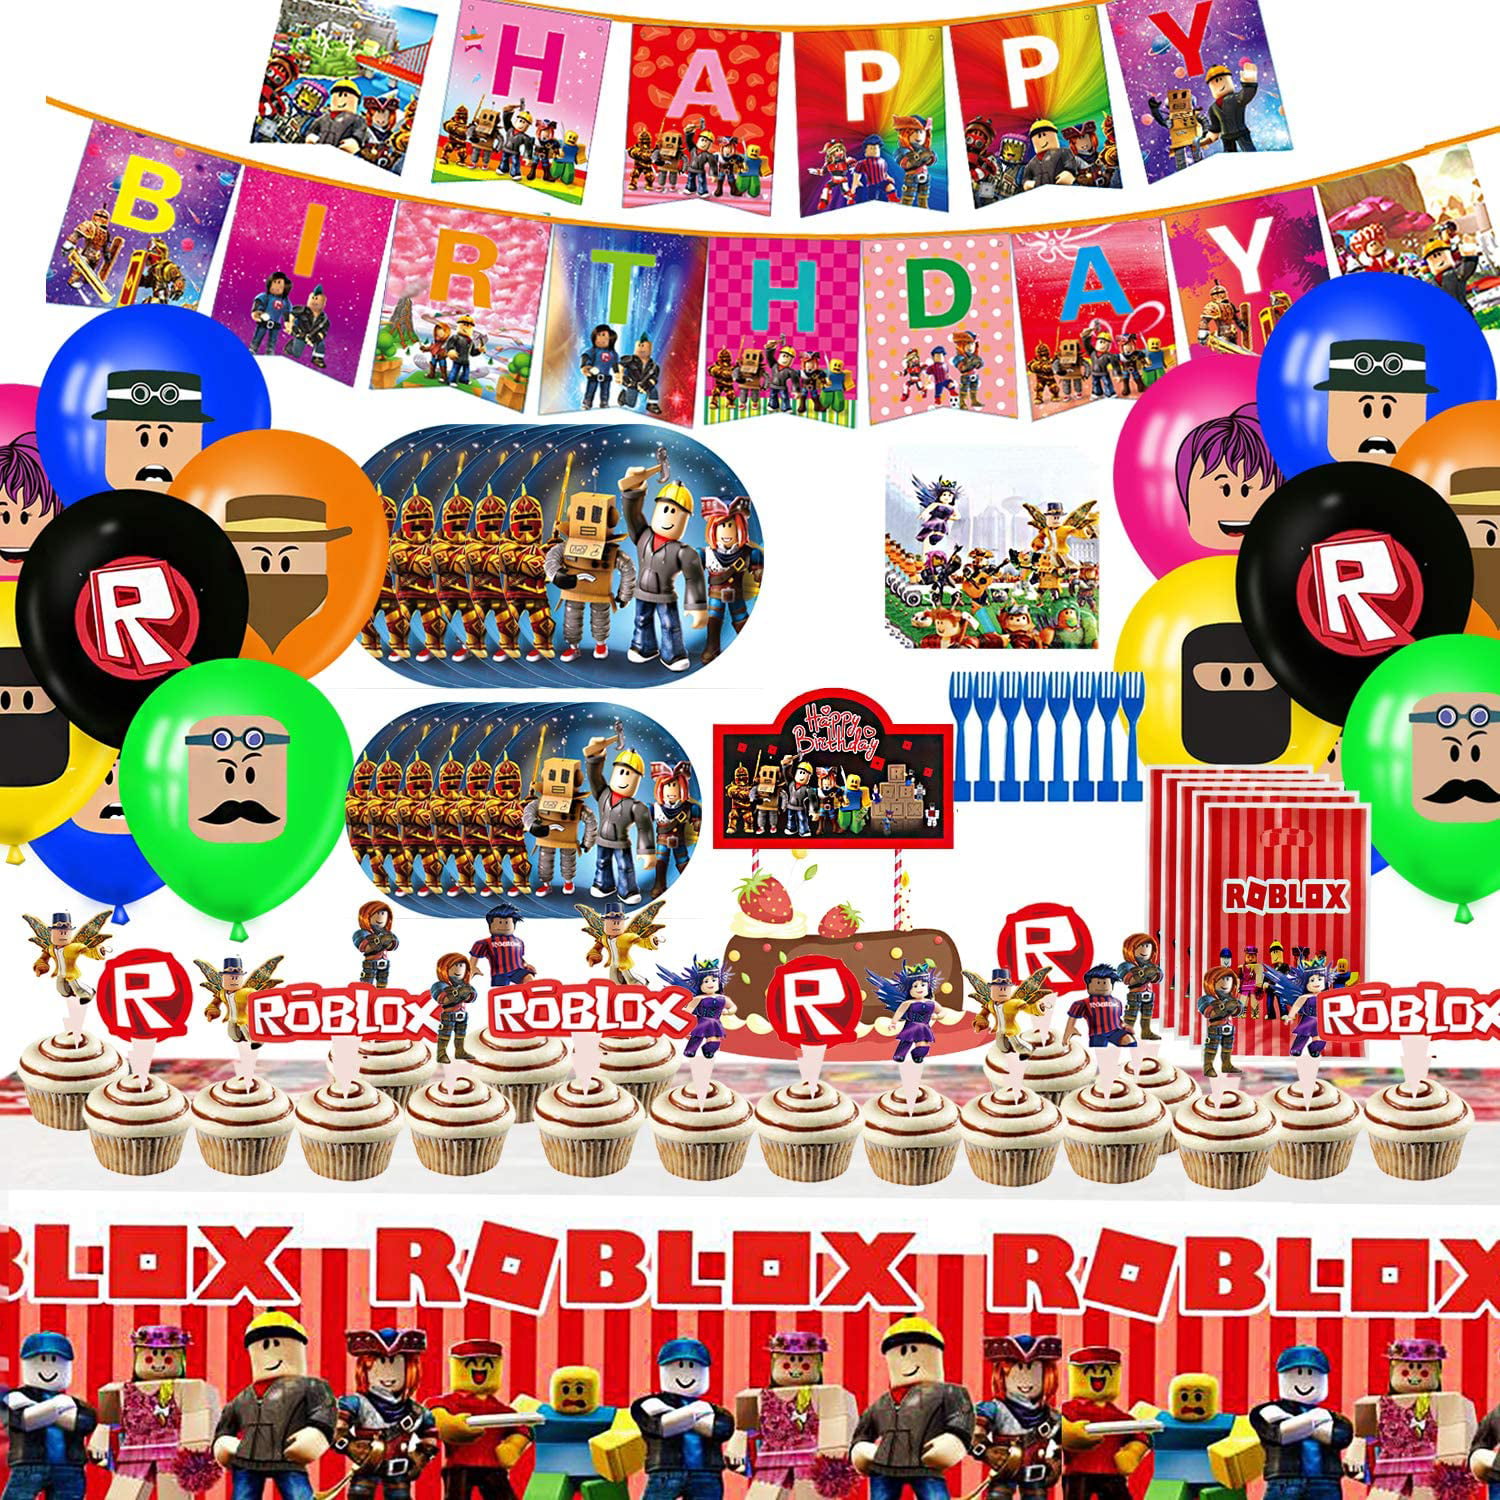 105 Pcs Roblox Birthday Party Supplies Robot Blocks Party Decorations Banners Cake Topper Plates Forks Gift Bags Cupcake Toppers Tablecover Napkins And Balloons Walmart Com Walmart Com